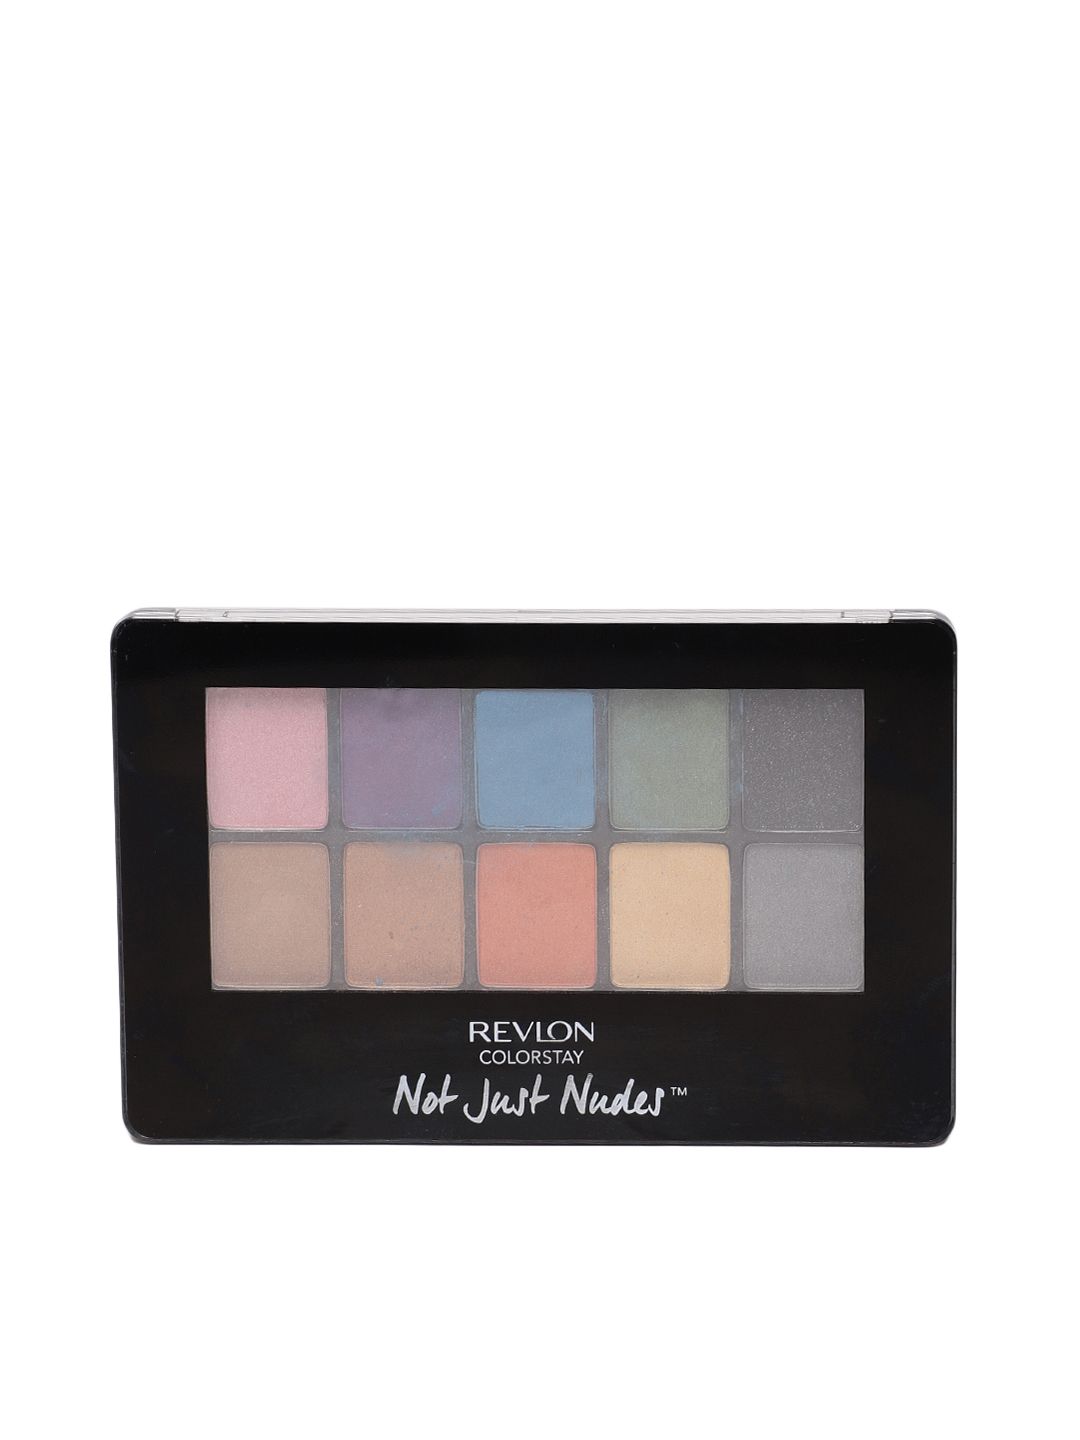 Revlon Colorstay Not Just Nudes Shadow Palette Vibrant Hues Price in India